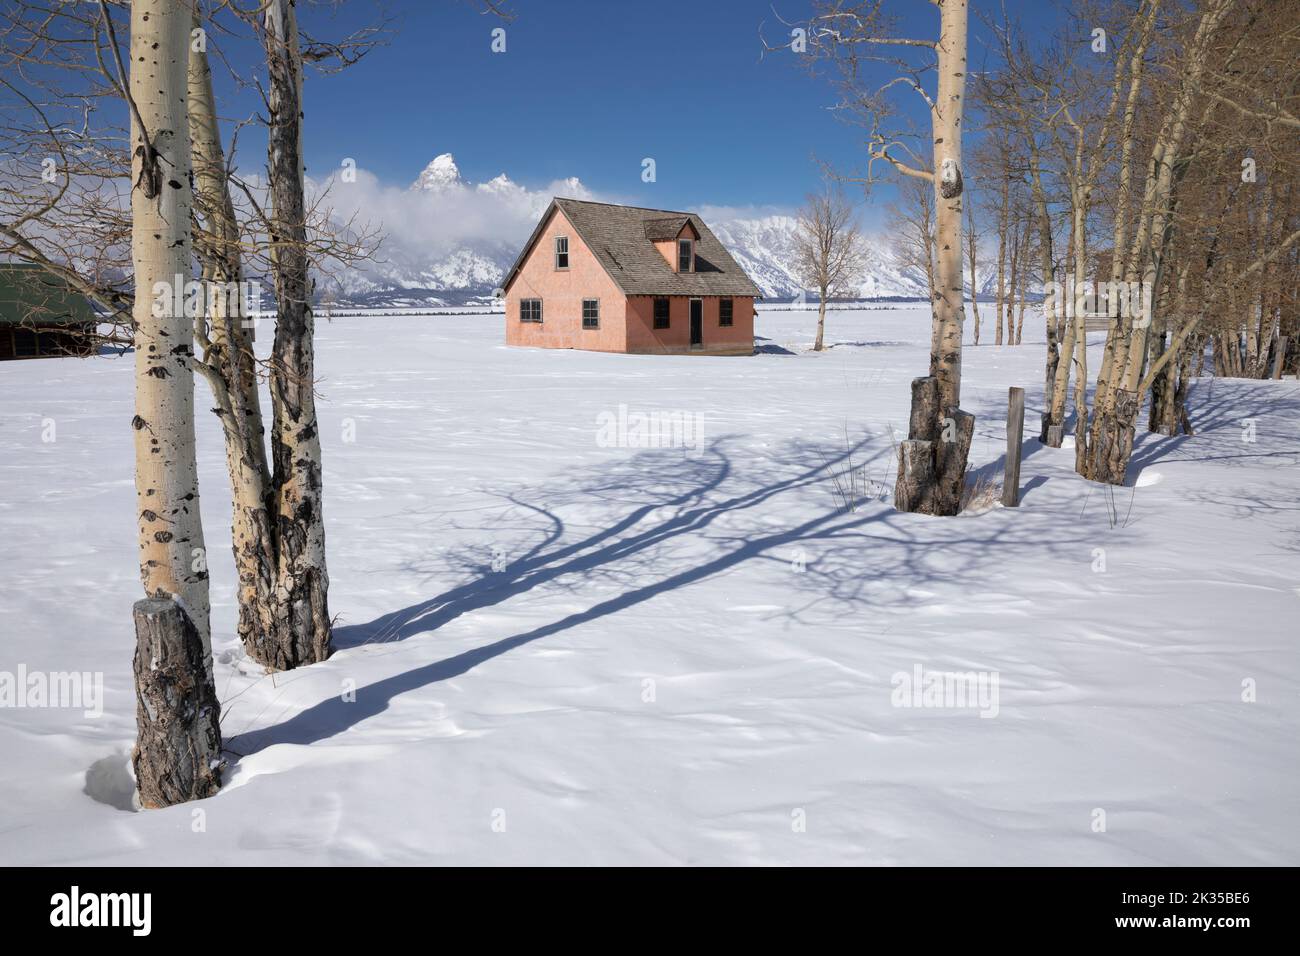 WY05070-00.....WYOMING - House with the Teton Range. Located along Mormon Row Historic Distric in Grand Teton National Park. Stock Photo